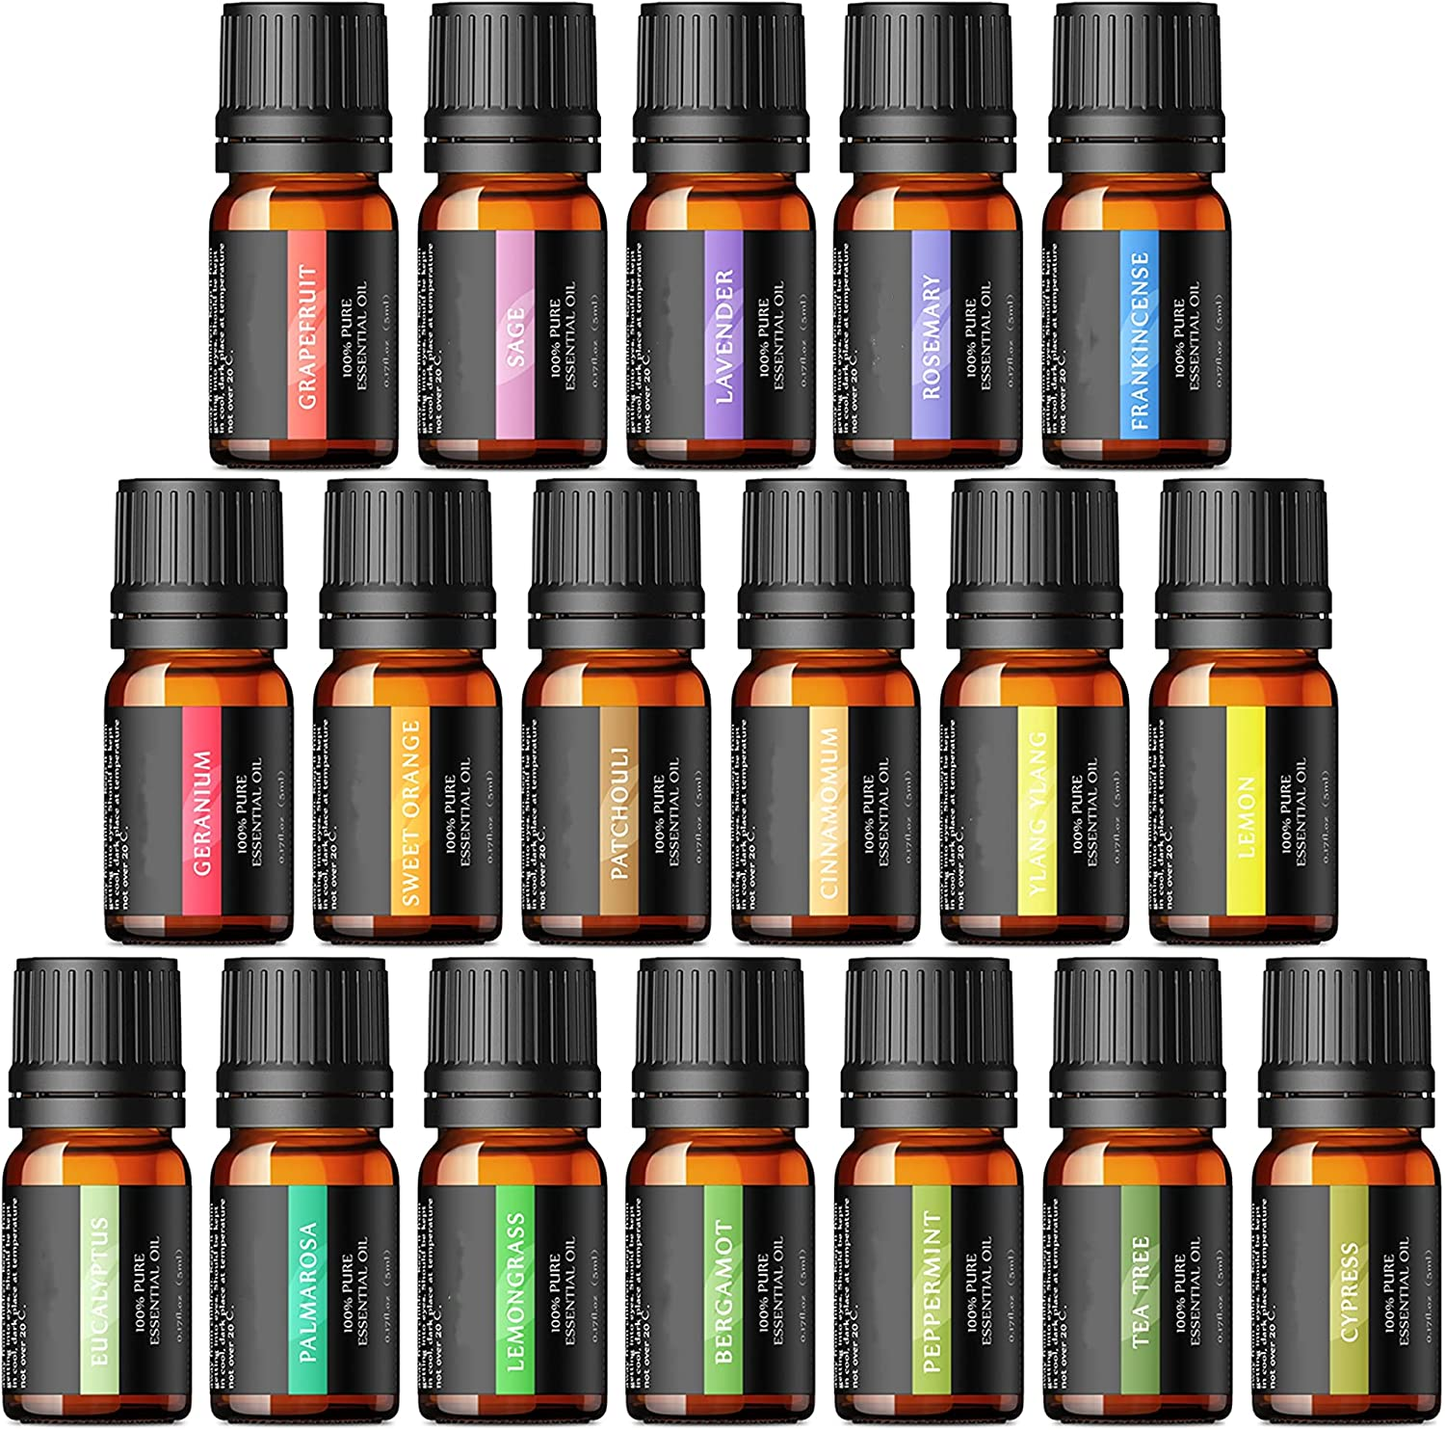 AOSNO Essential Oils Set Top 6*10 Ml Essential Oils for Candle Making, Skin, Massage, Hair Care & Diffuser 100% Pure Therapeutic Grade Aromatherapy Oils Gift Set for Home, Car & Office